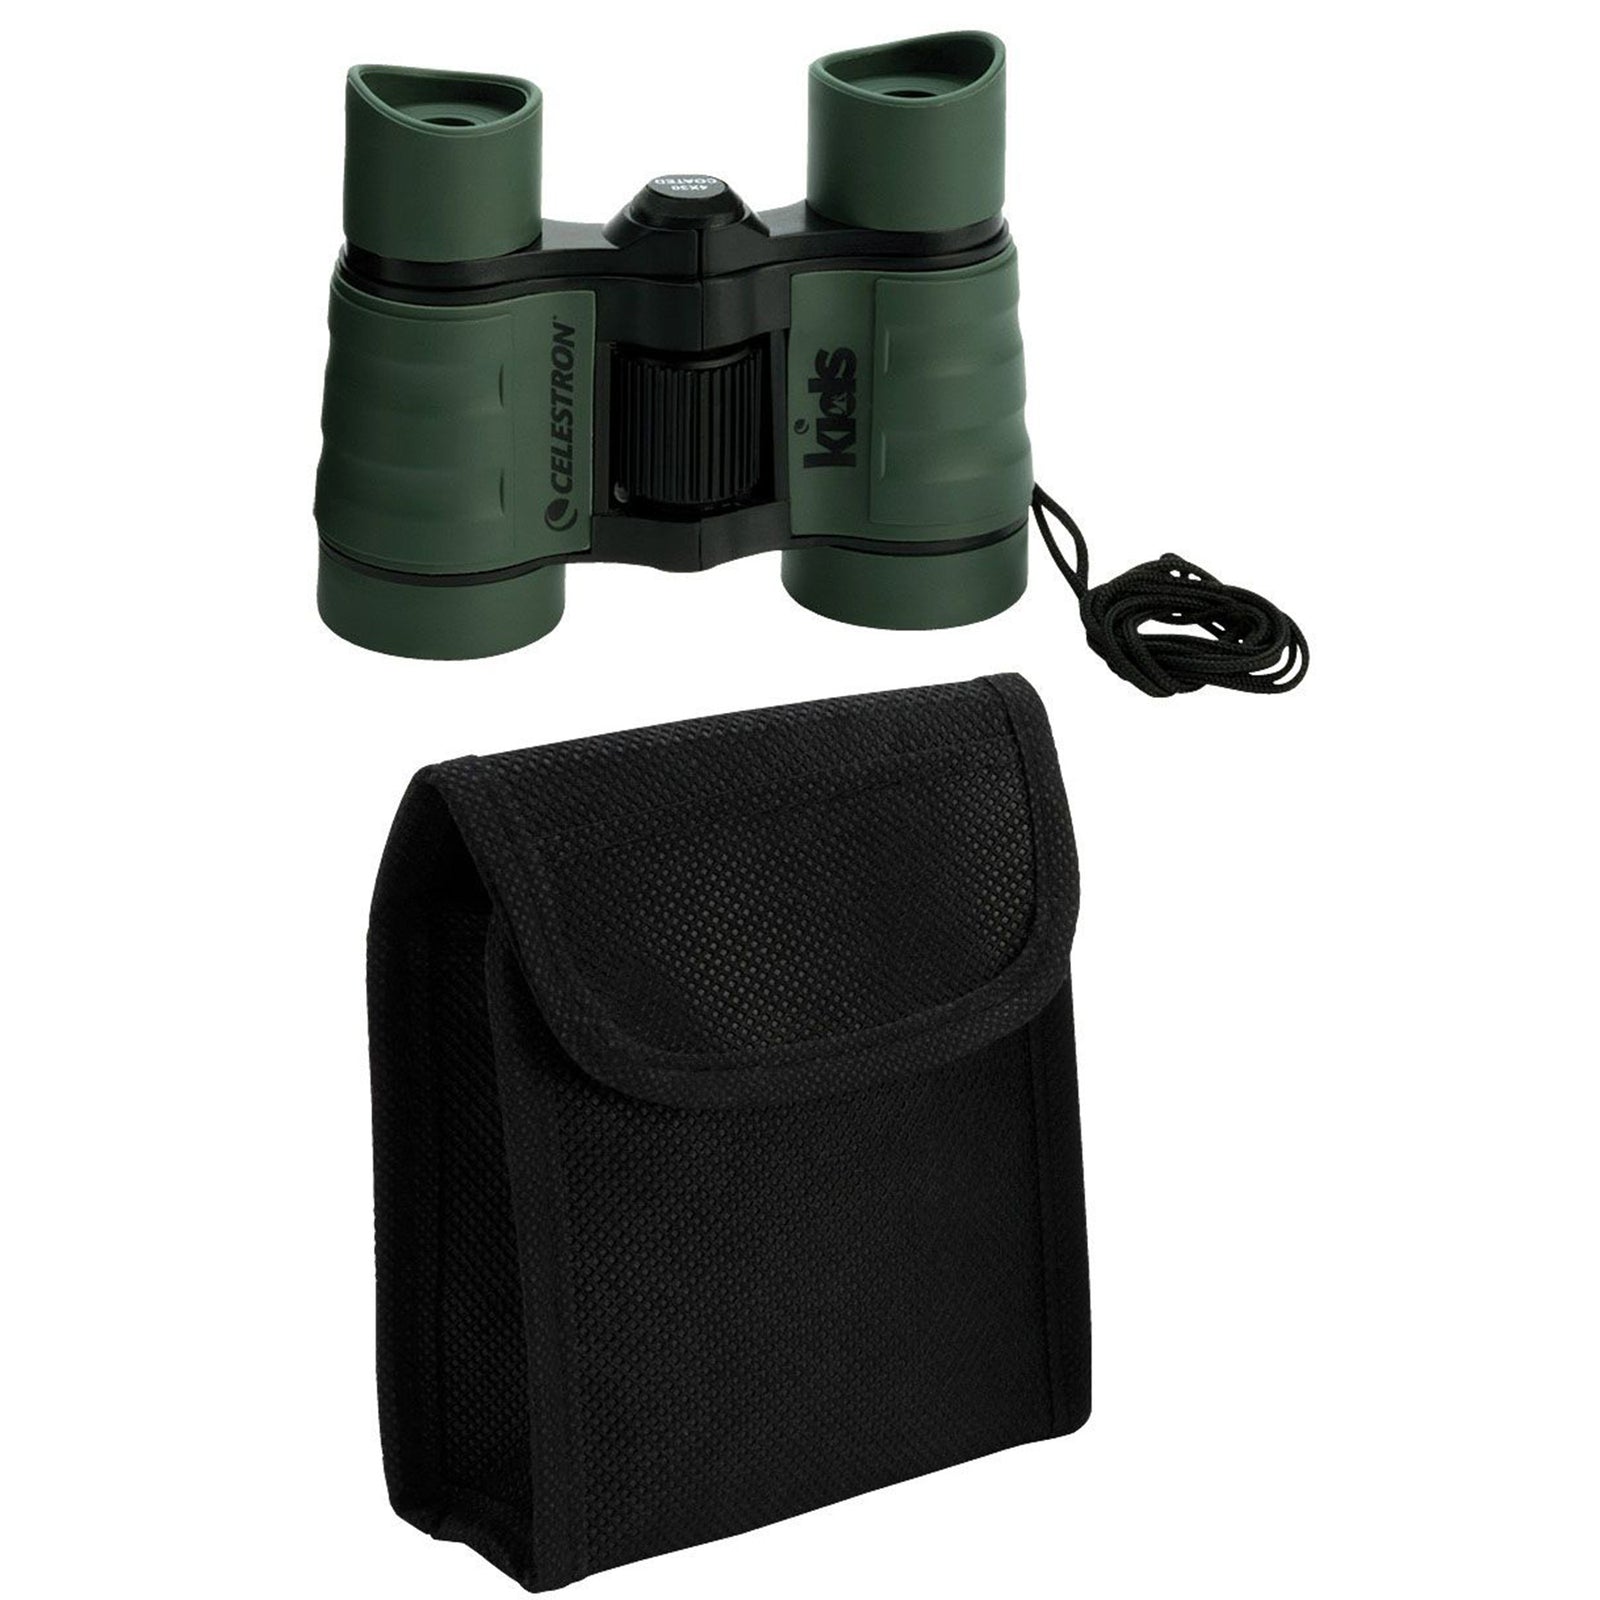 celestron kids binoculars, 4x magnification, 30mm lenses, age rated 6+